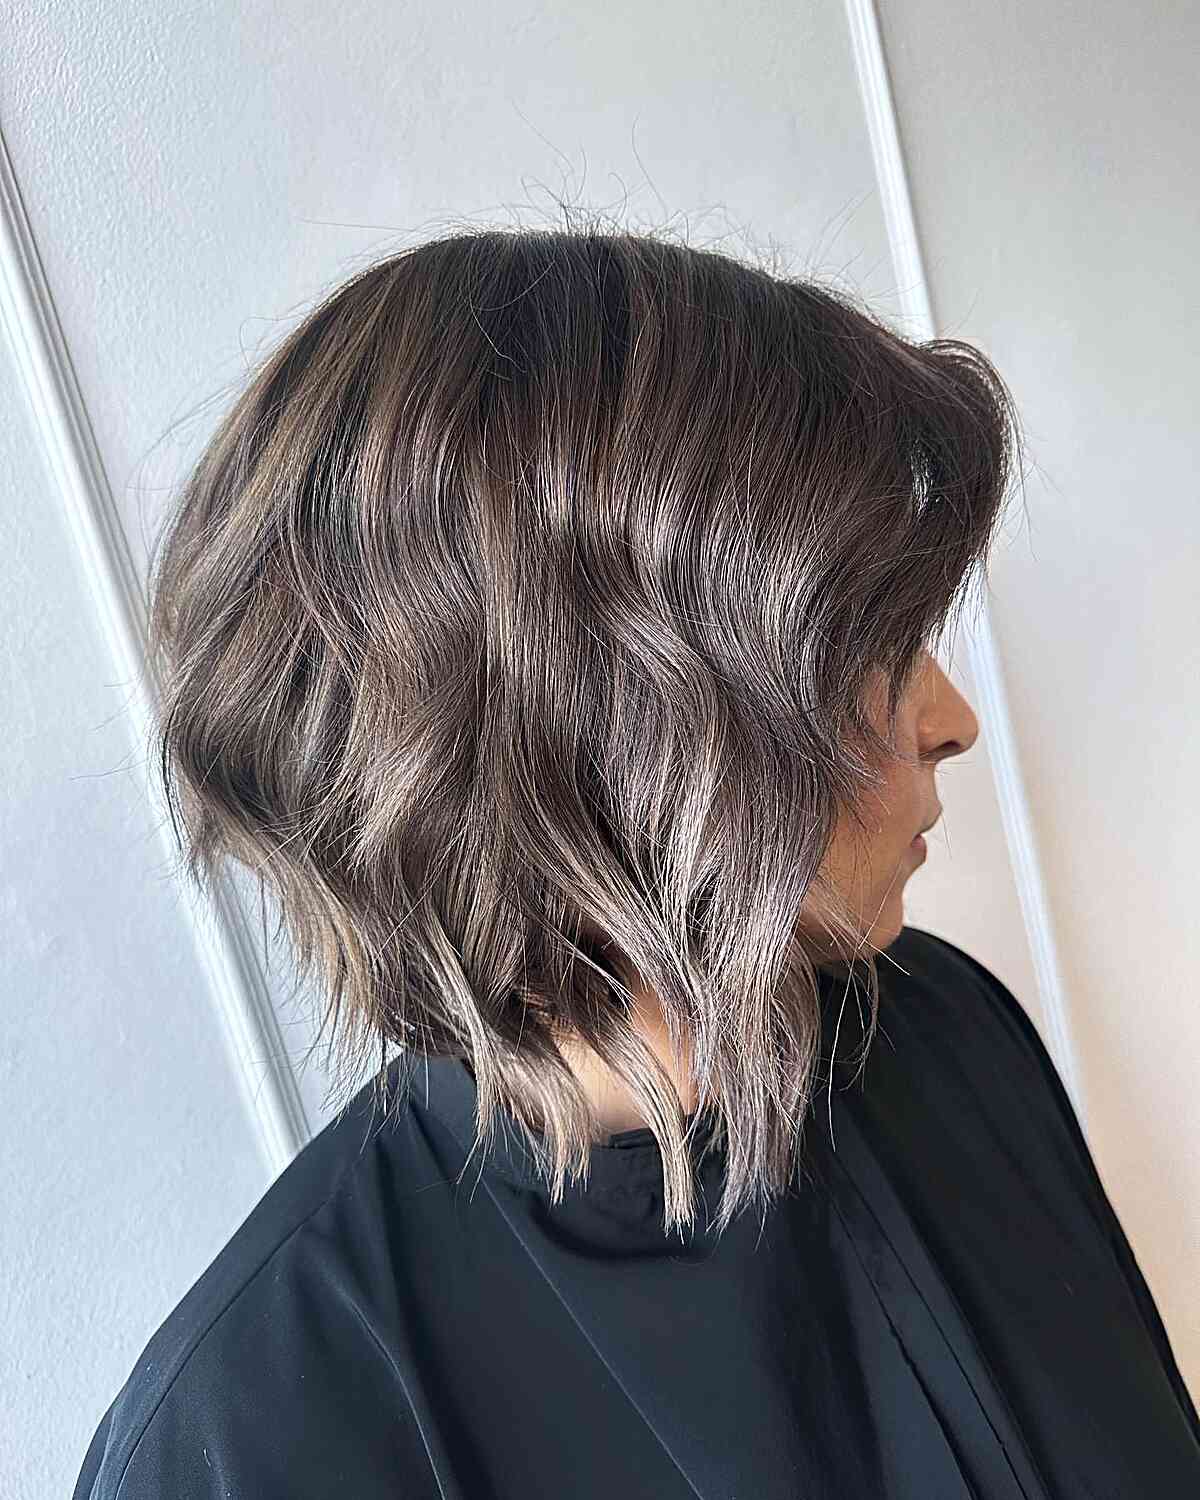 Short Textured and Layered Inverted Bob